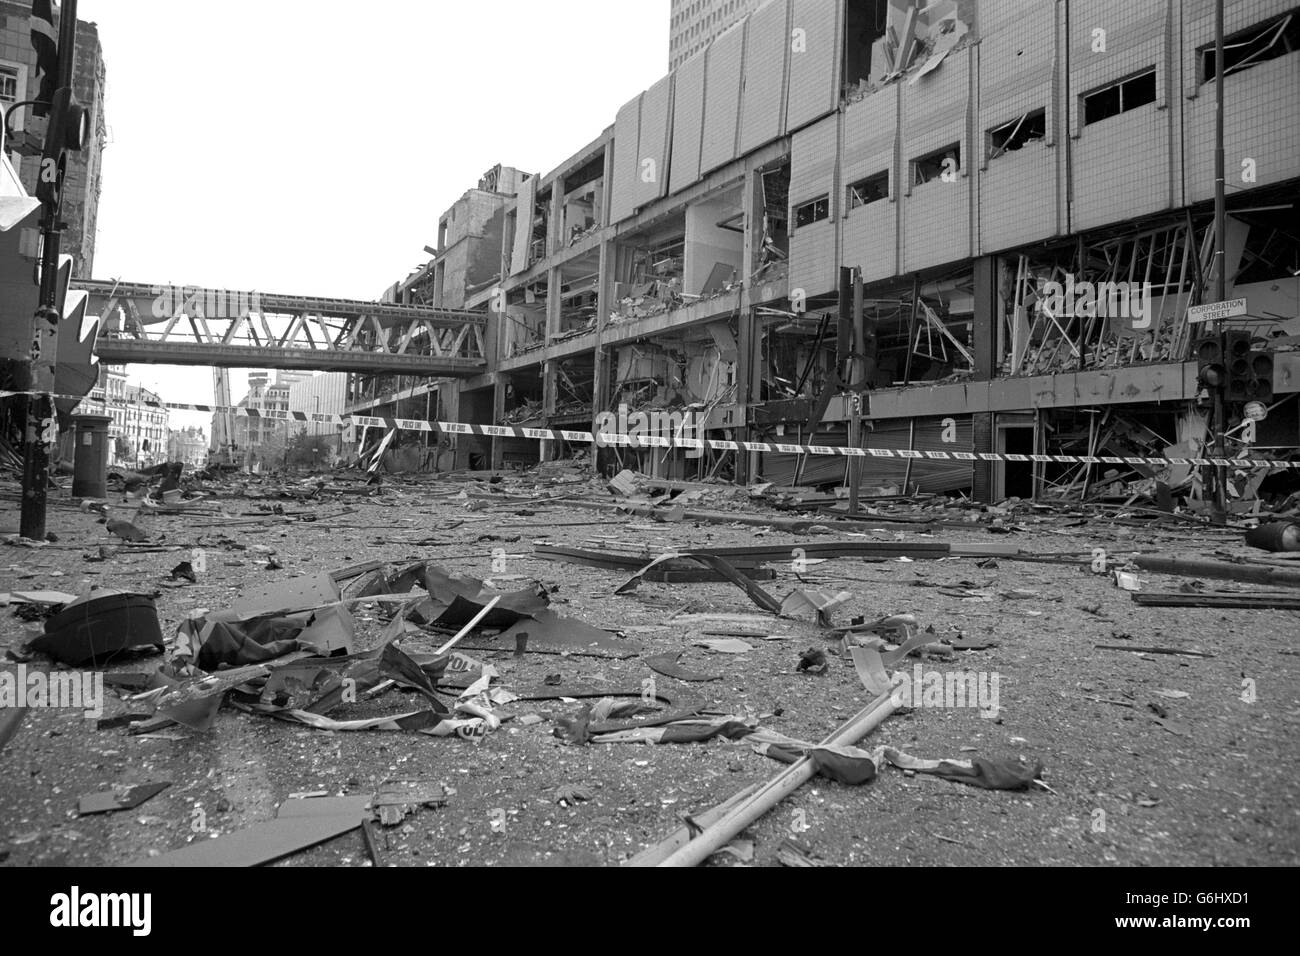 Terrorism - The Troubles - IRA Bomb - Manchester. The scene of devastation in Manchester City Centre following the bomb attack. PA photo by Paul Barker. Stock Photo